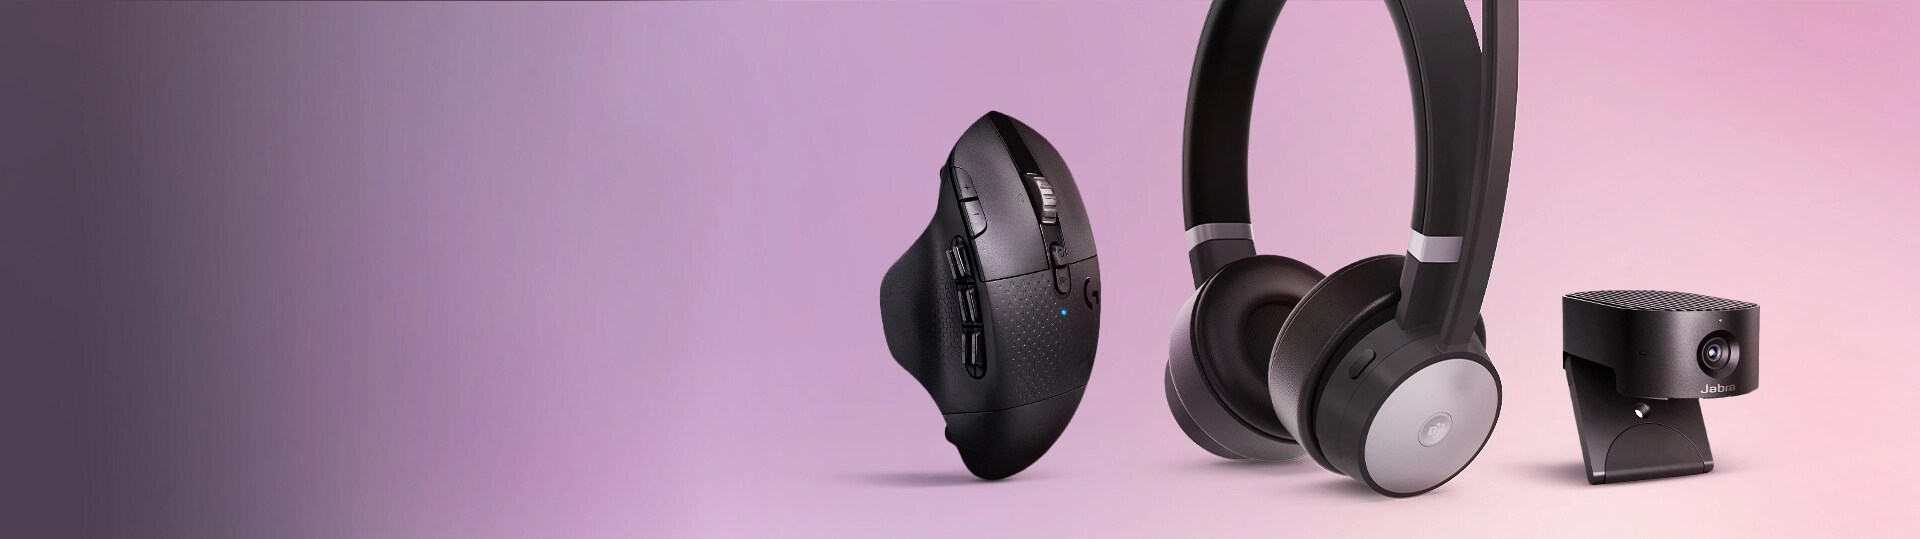 A Lenovo Go Wireless ANC Headset, a Logitech G604 LIGHTSPEED Wireless Gaming Mouse (with HERO 25K Sensor) and a Jabra PANACAST 20 are featured on a background.